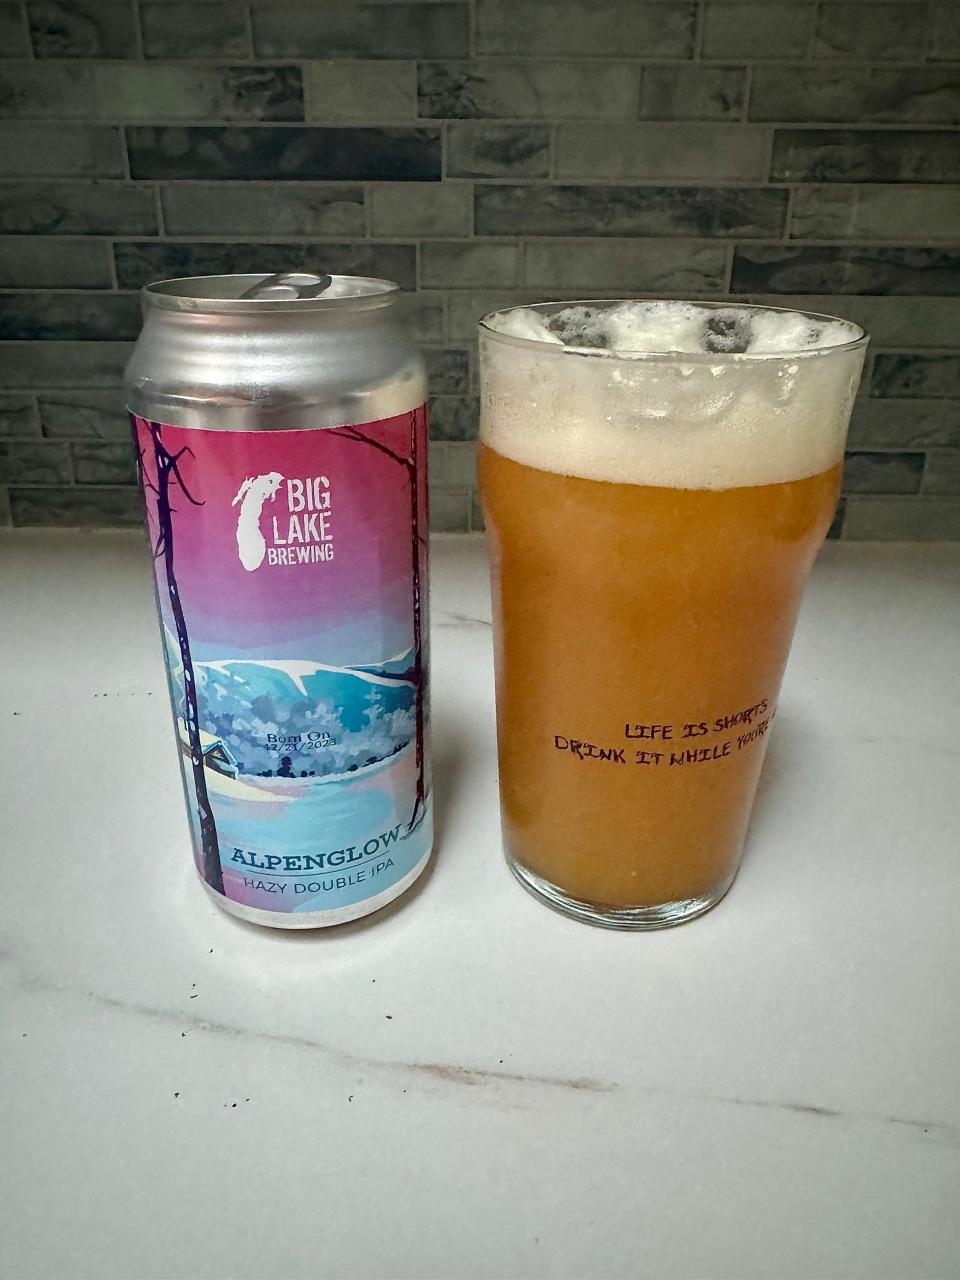 Alpenglow Double New England IPA from Big Lake Brewing Co., based in Holland.